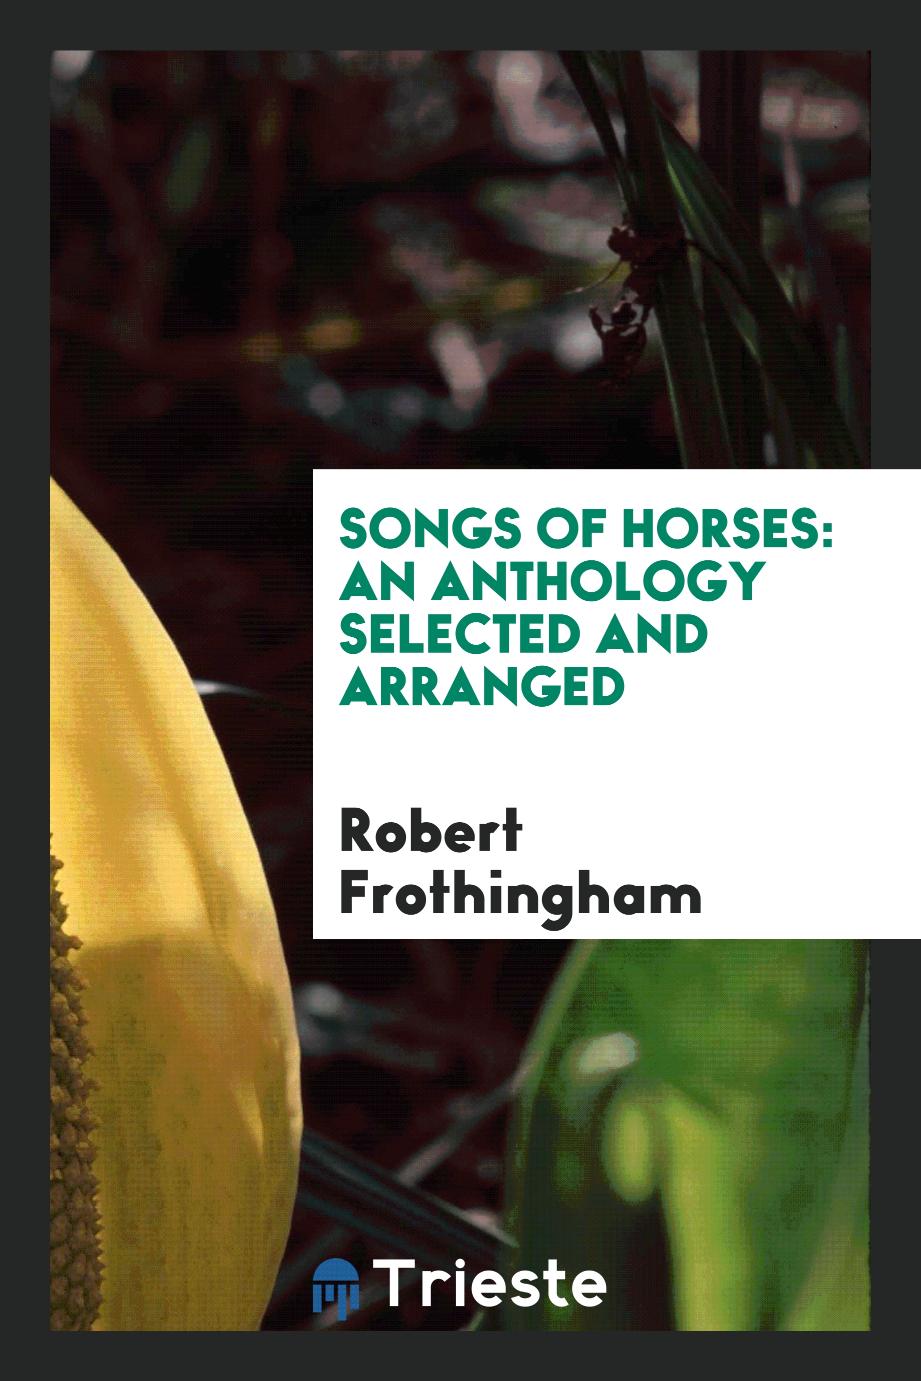 Songs of horses: an anthology selected and arranged